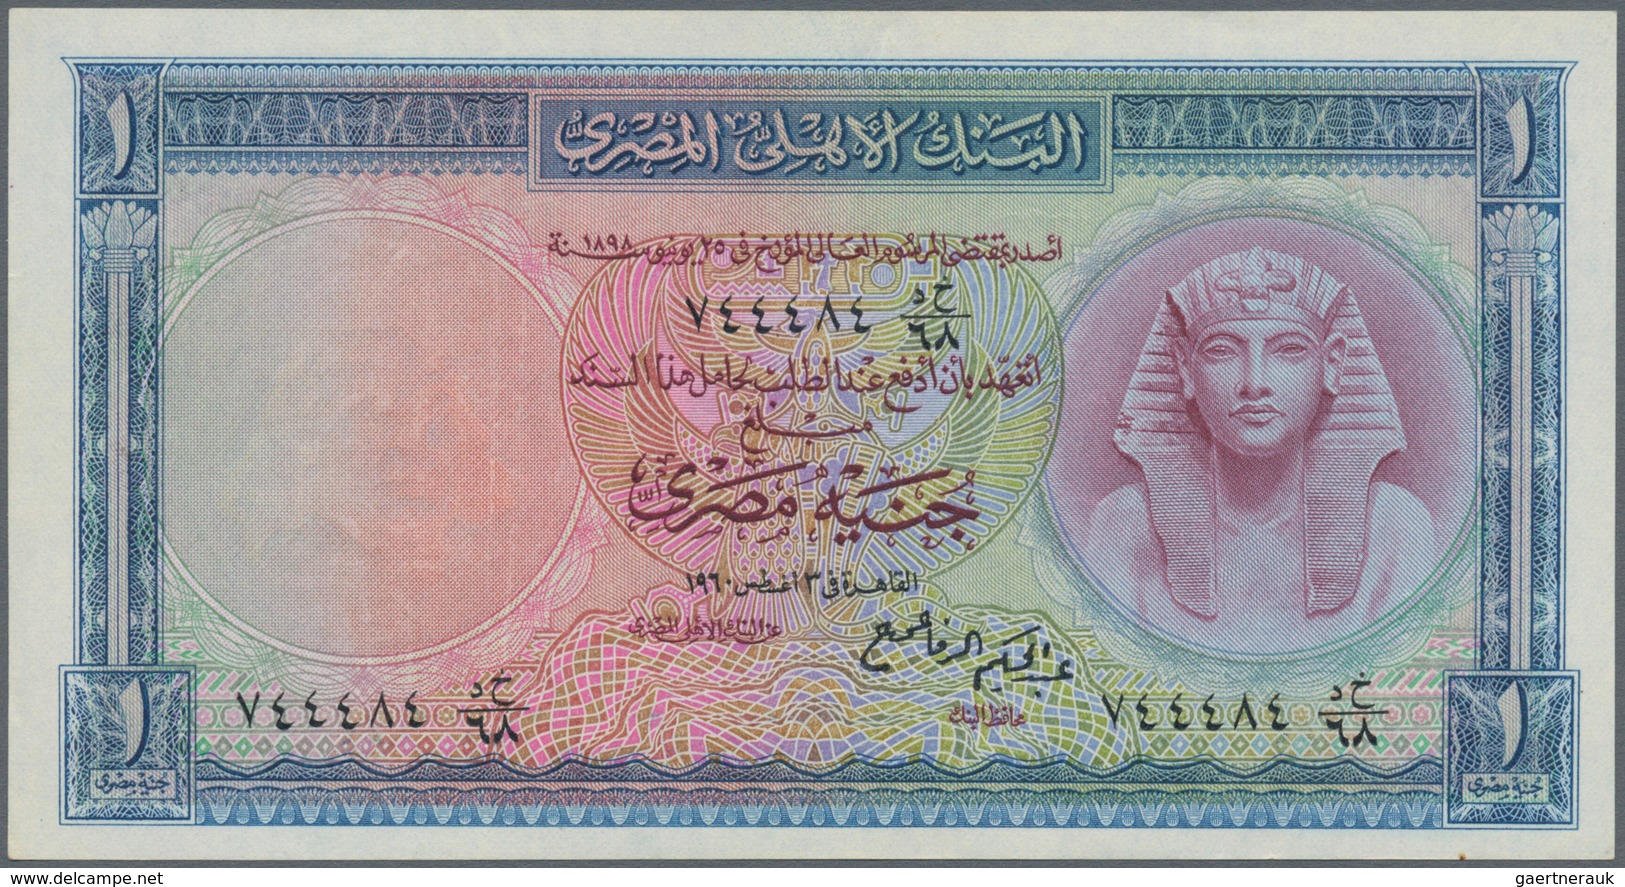 Africa / Afrika: large lot of about 620 banknotes from Africa & Middle East collected in 2 red album